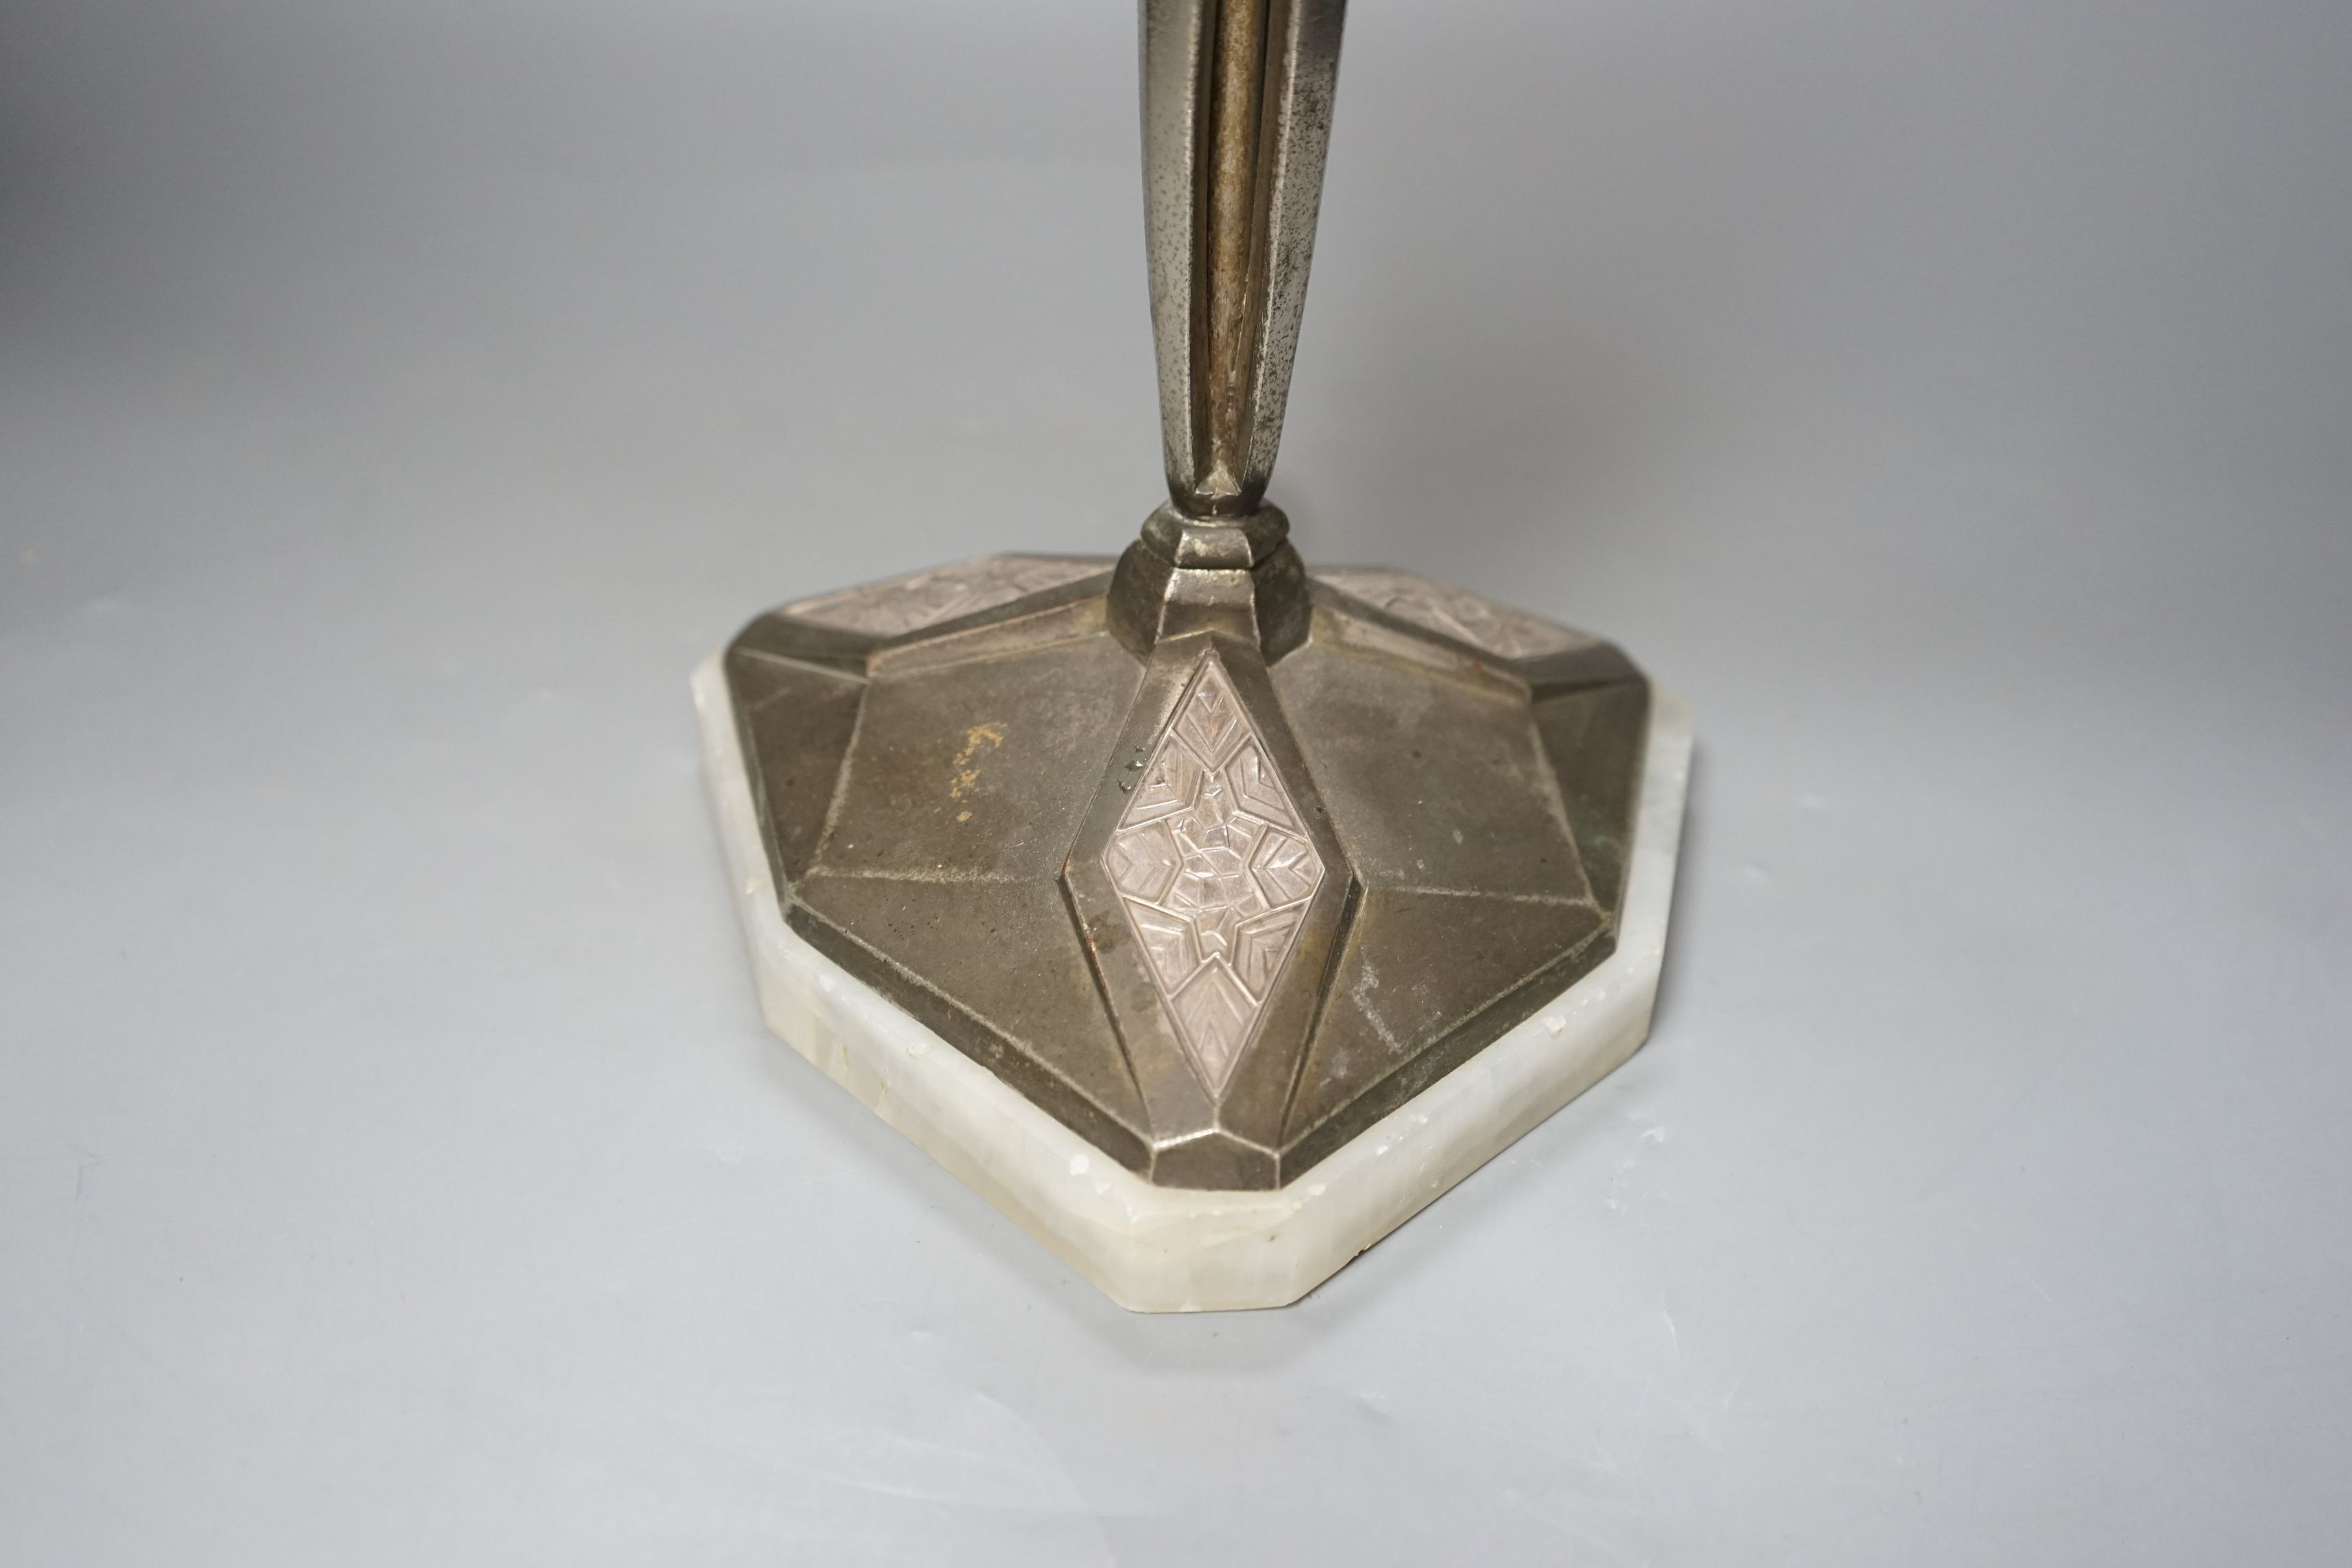 A Secessionist metal table lamp base - indistinctly initialled, 64cms high